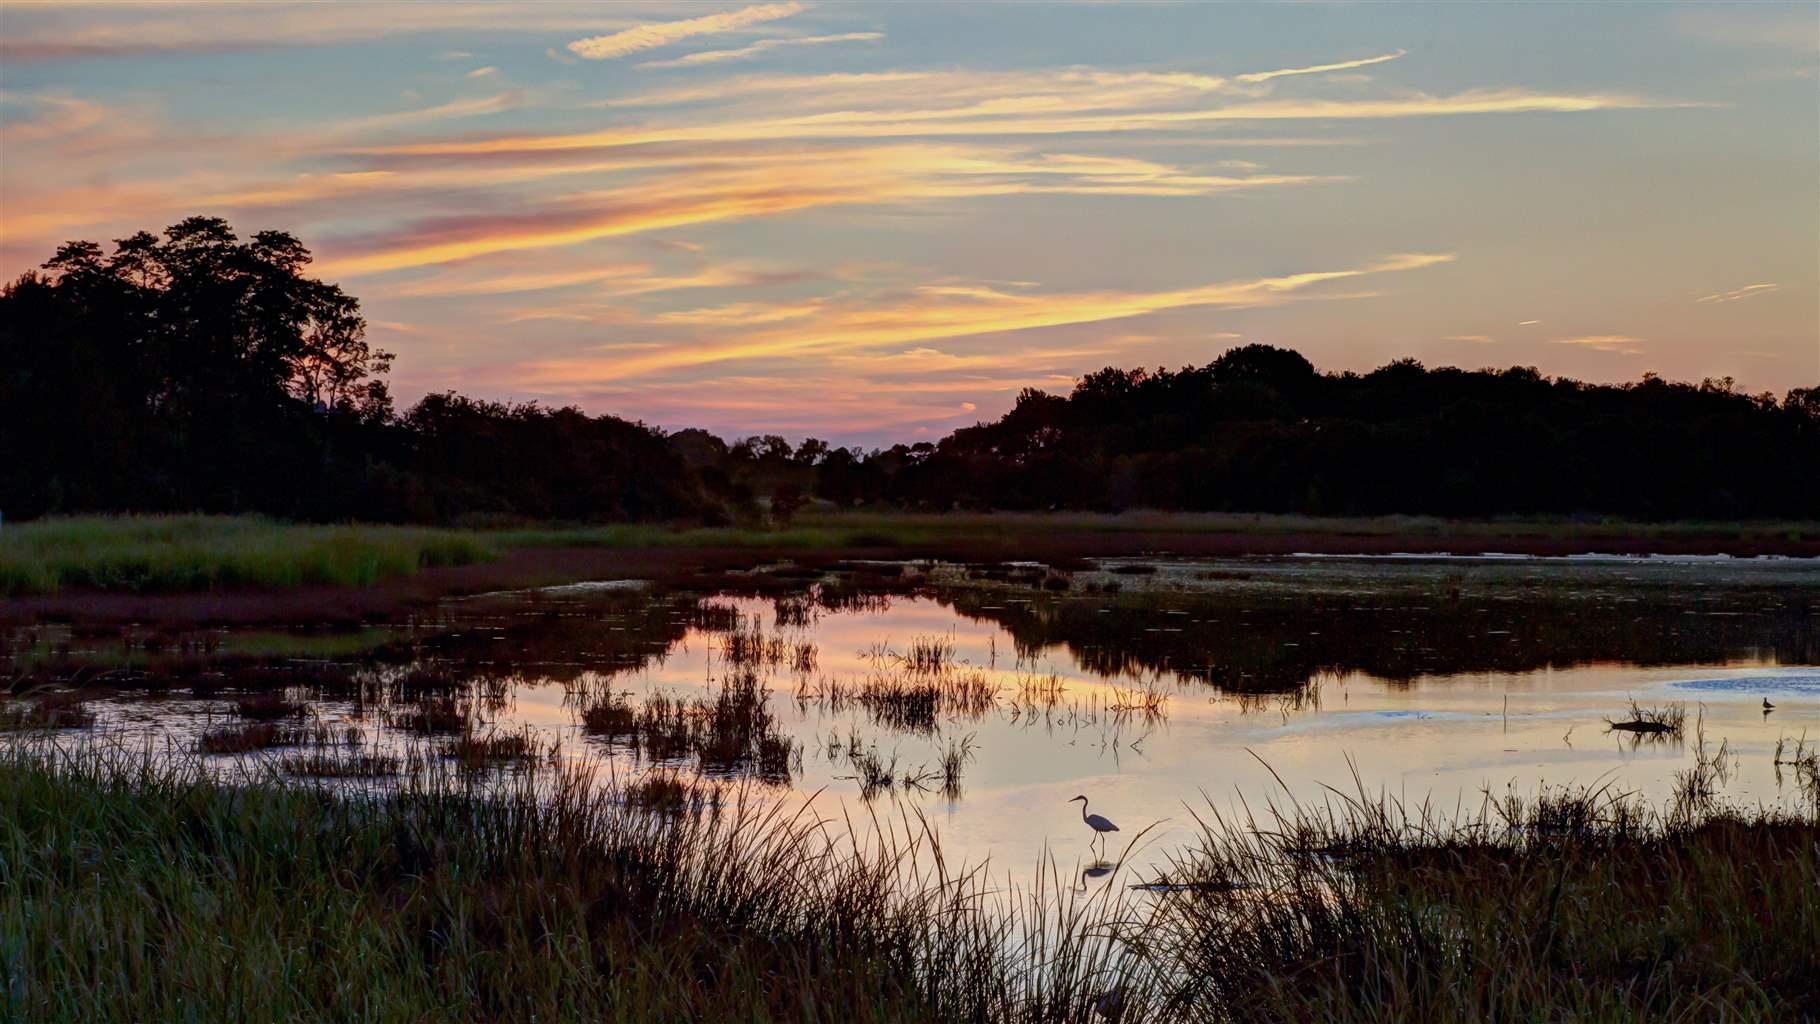 Still waters reflect the orange-tinged hues of a setting sun. Tall grasses hug the water’s edge, with trees visible in the distance and an expansive sky streaked with clouds framing the scene. 